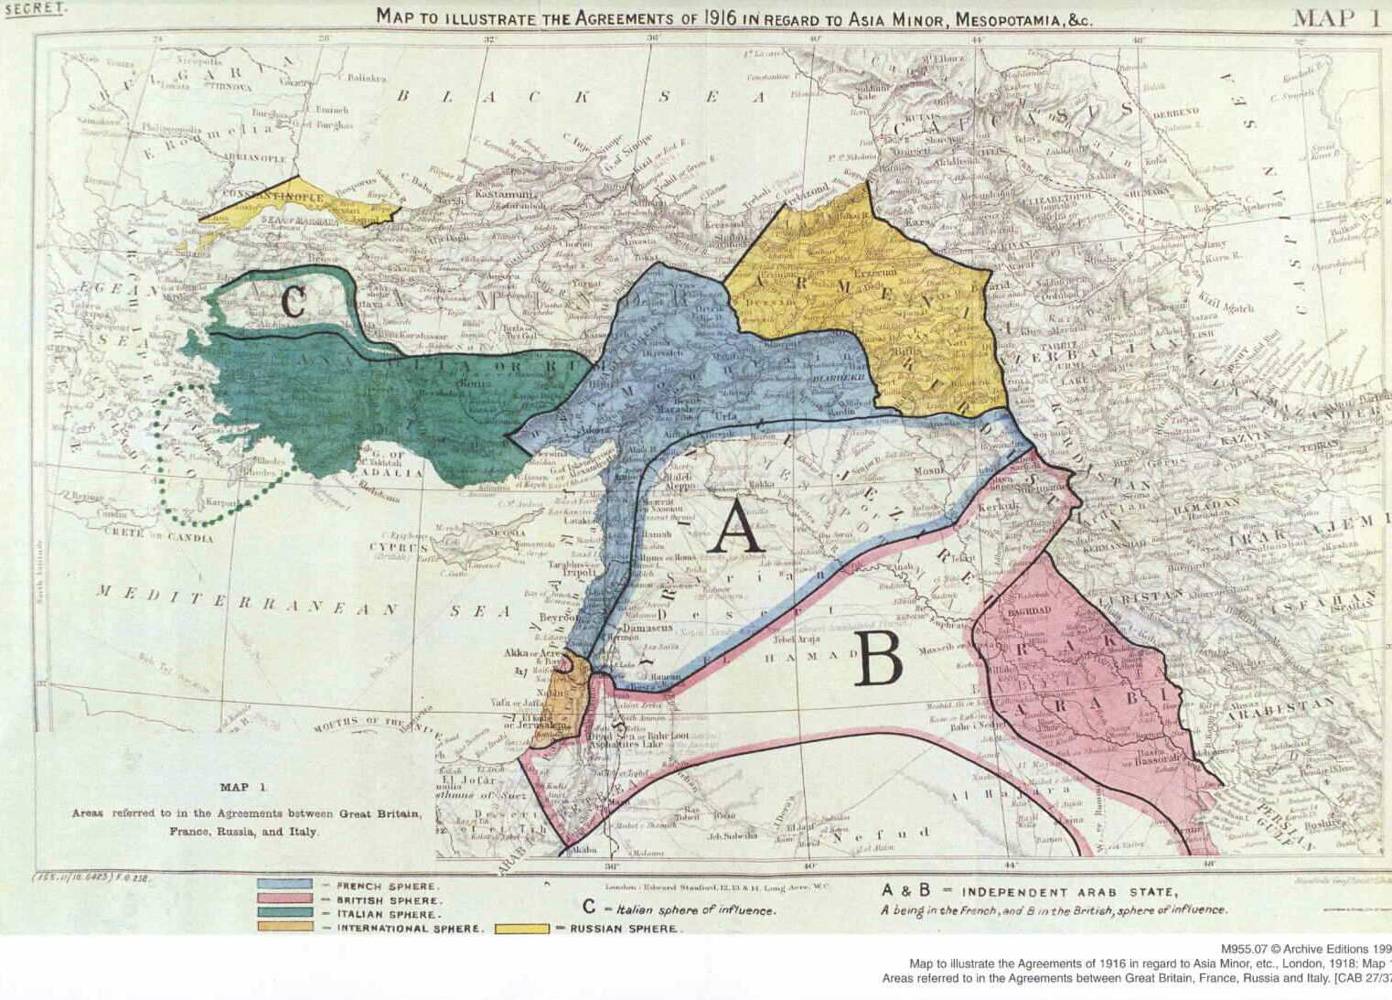 Map to illustrate the Agreements of 1916 in regard to Asia Minor, etc., London, 1918: Map Areas referred to in the Agreements between Great Britain, France, Russia and Italy. Photo: Archive Editions 1999 via Flickr